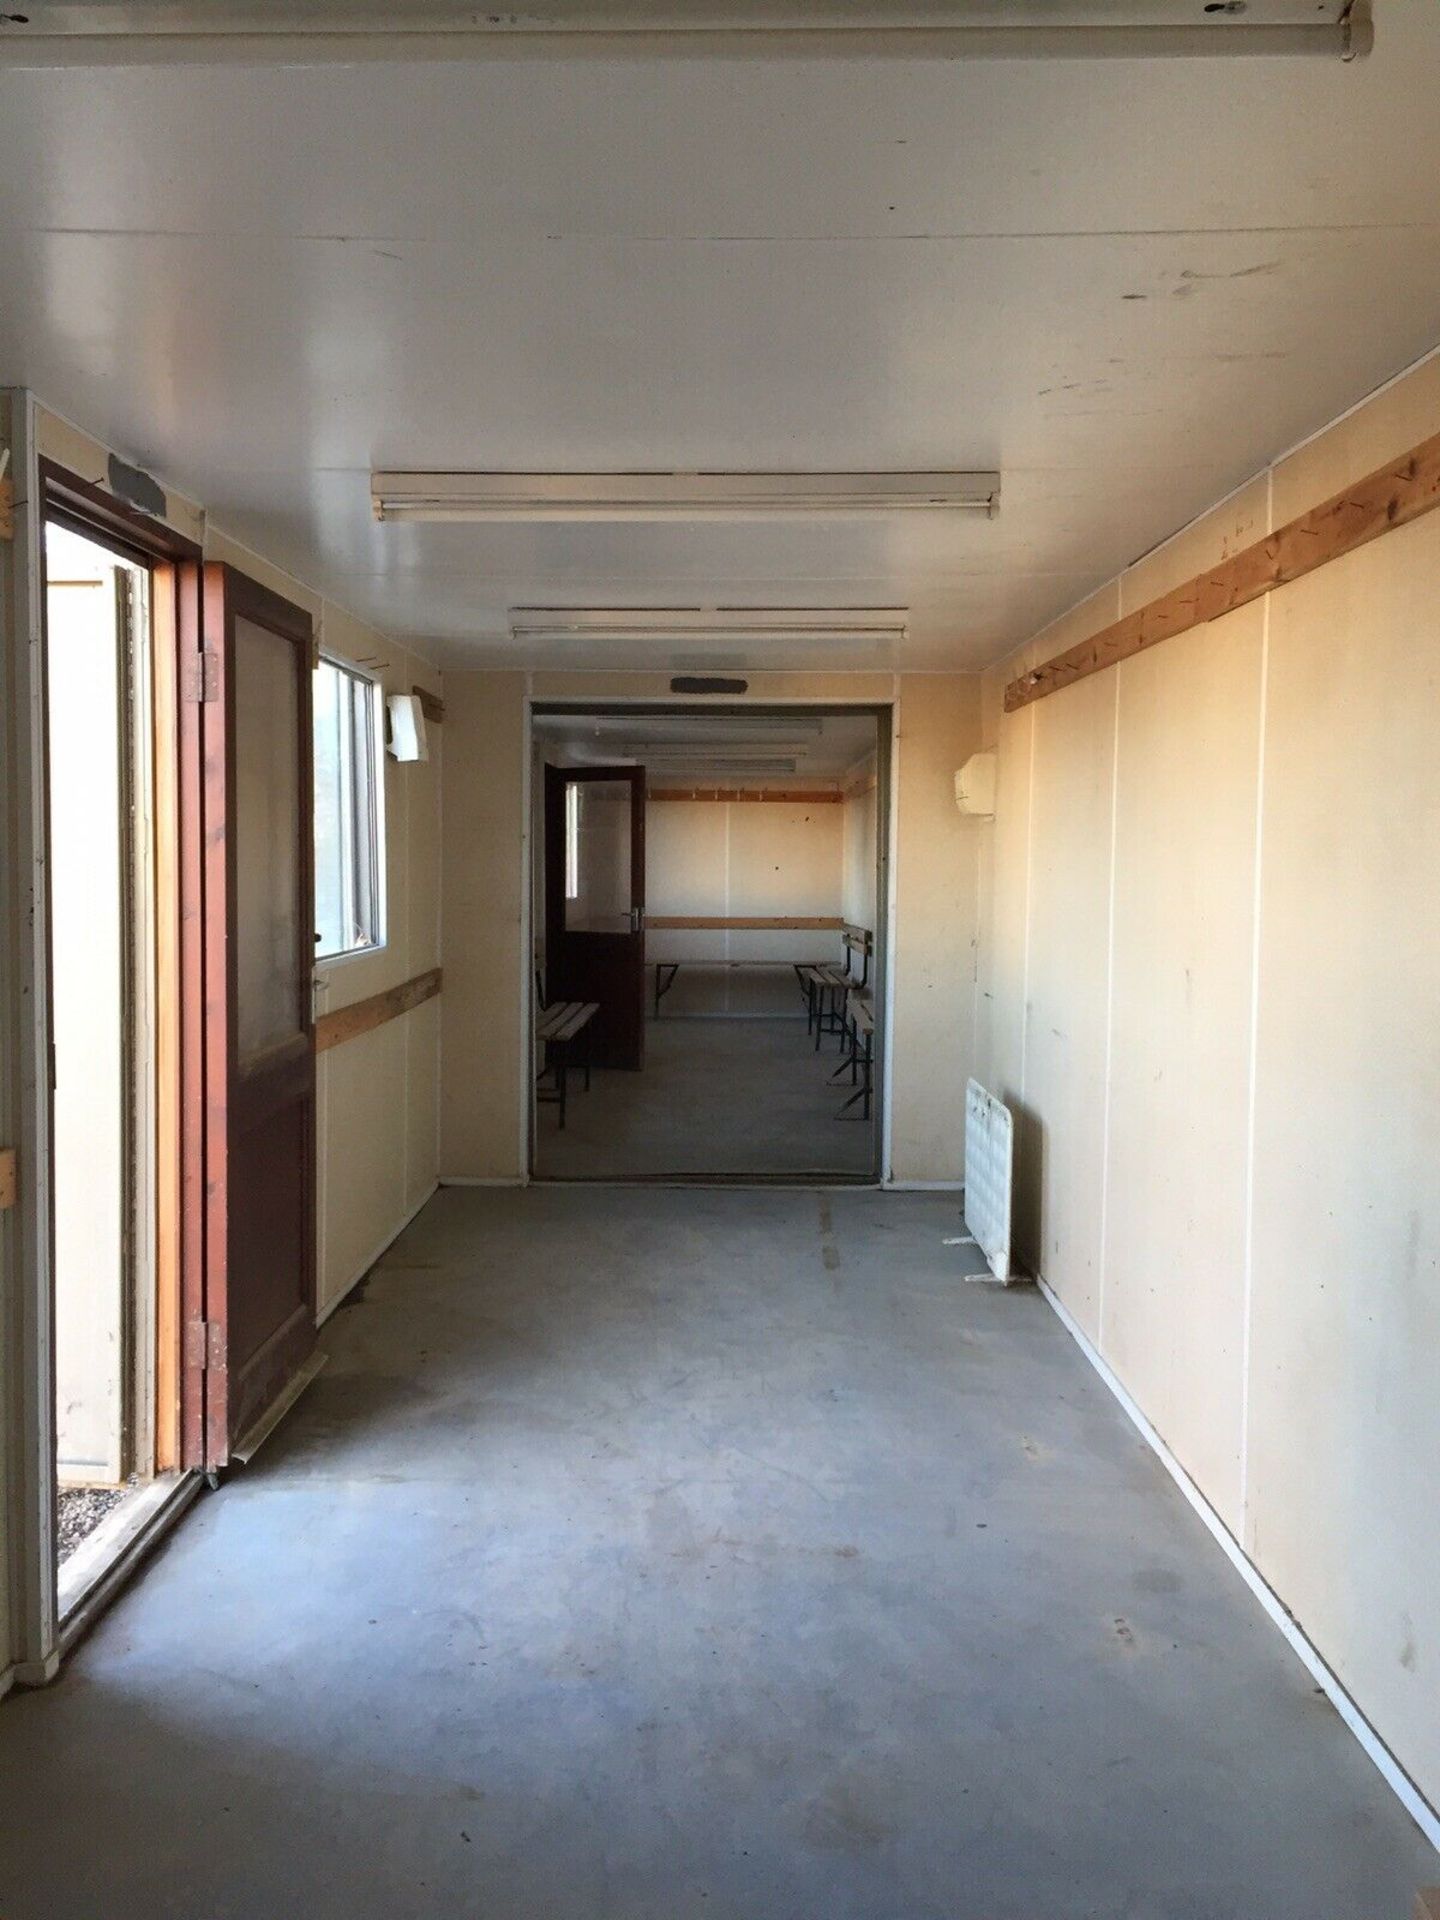 Modular Steel Site Office Building - Image 7 of 7